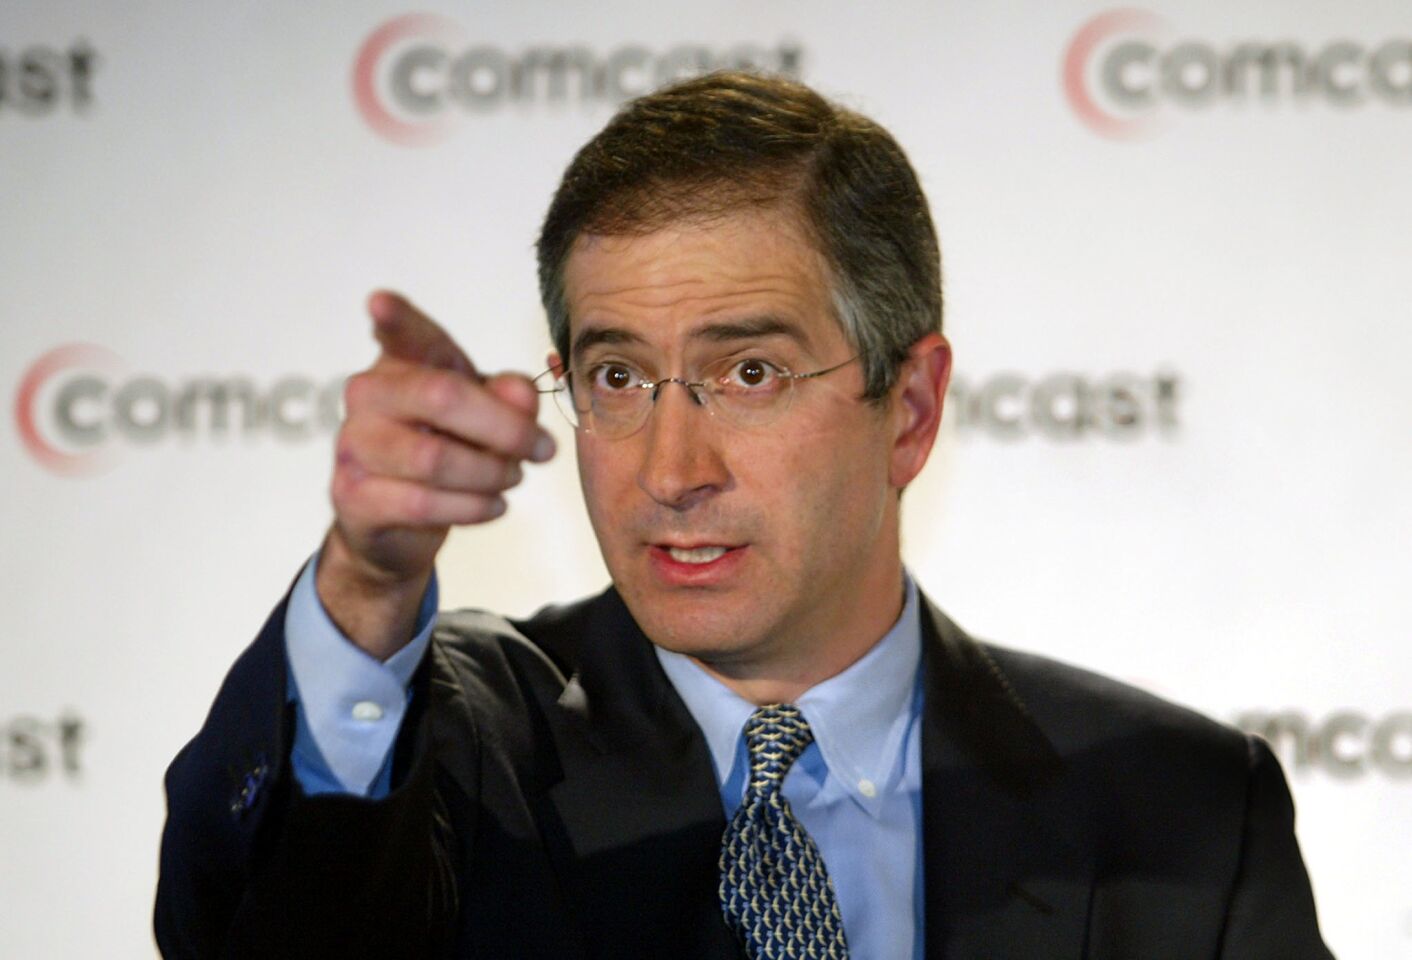 Roberts, chief executive of Comcast Corp., received a compensation package of $31.4 million. His package indicates an 8% rise from the $29 million package he collected the previous year.